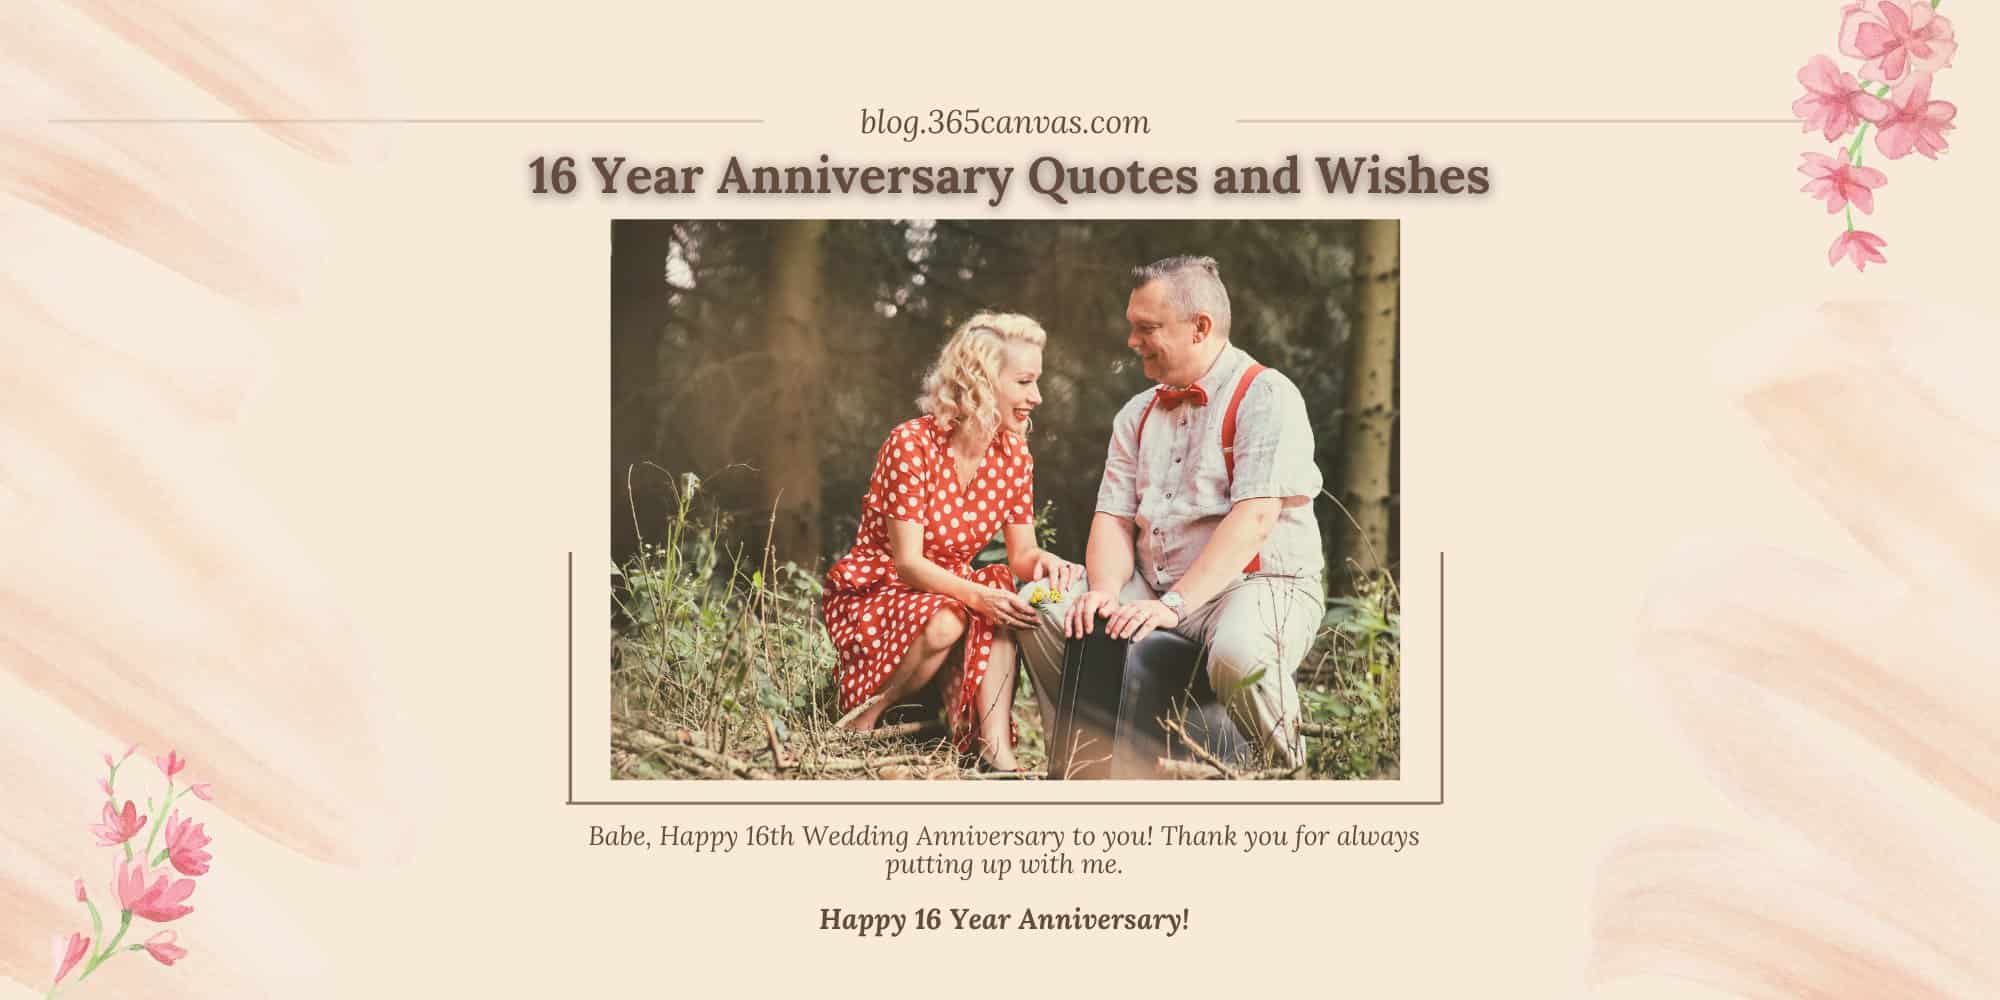 99+ Happy 16th Years Wax Wedding Anniversary Quotes, Wishes and Messages